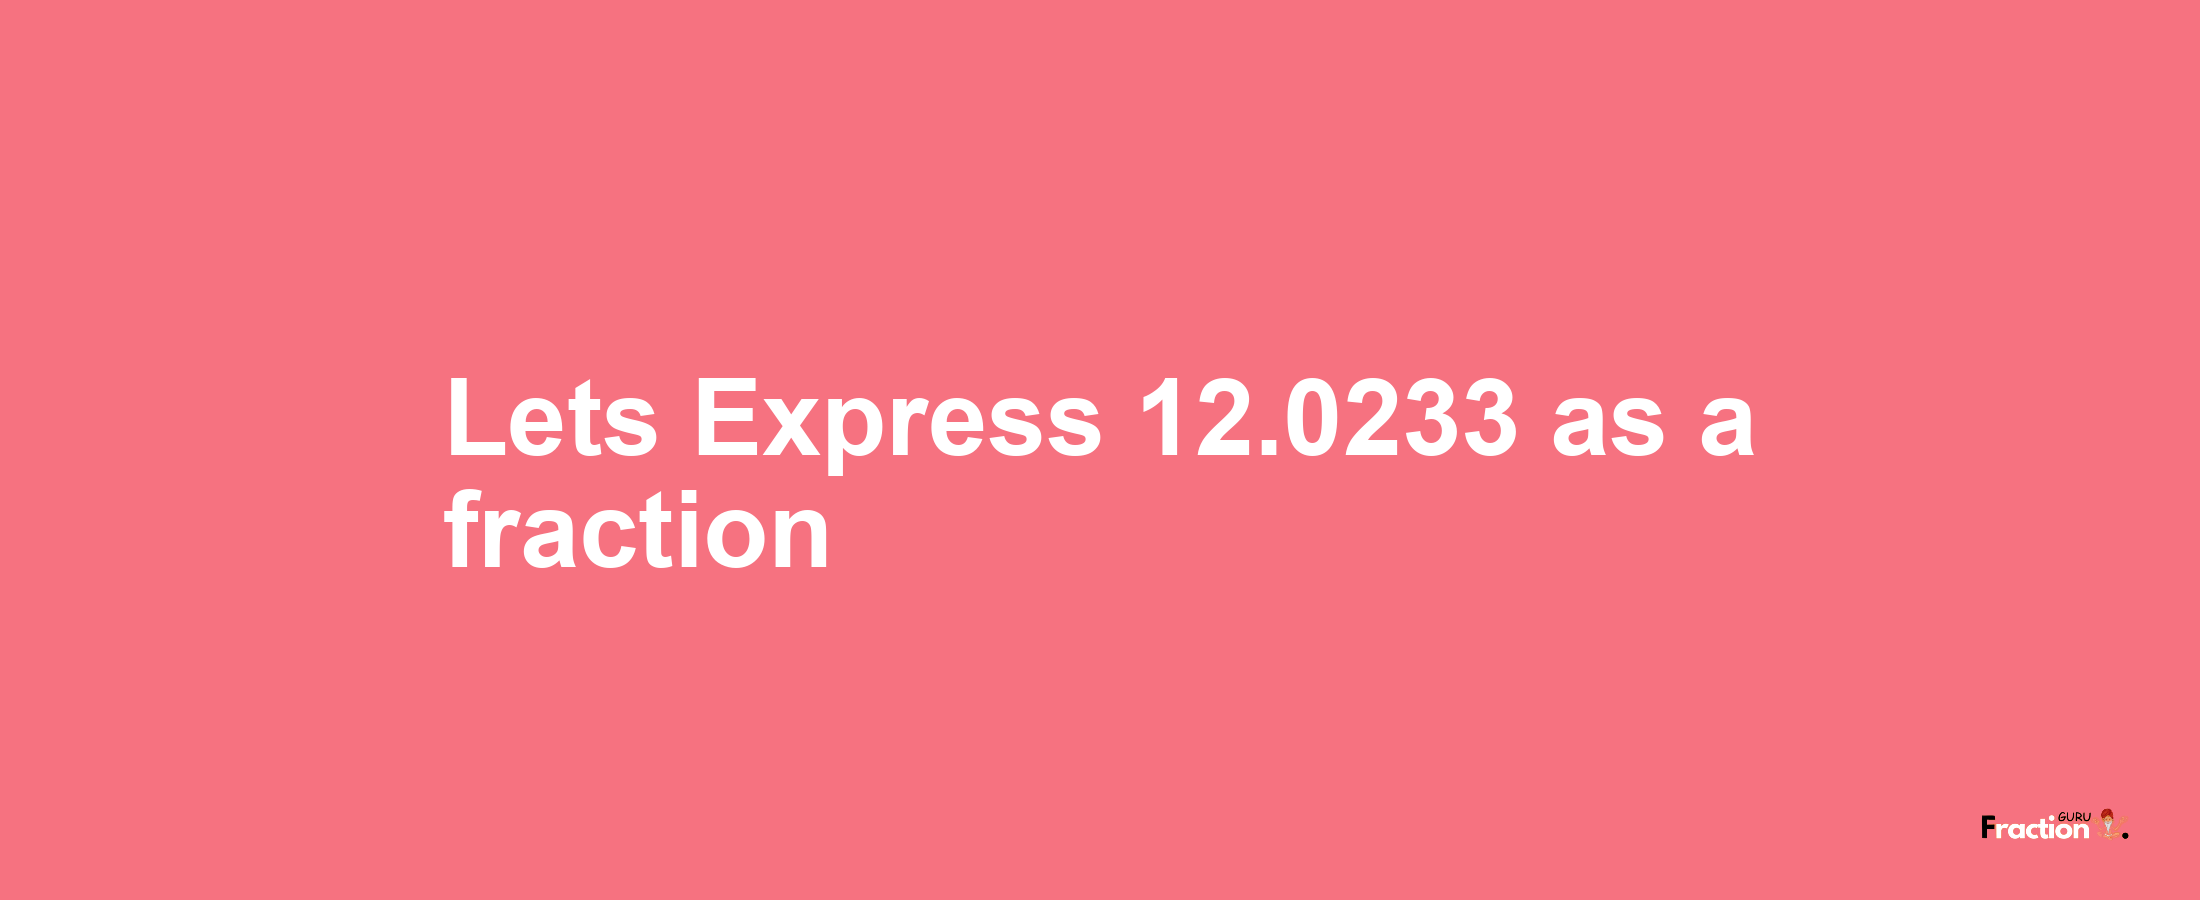 Lets Express 12.0233 as afraction